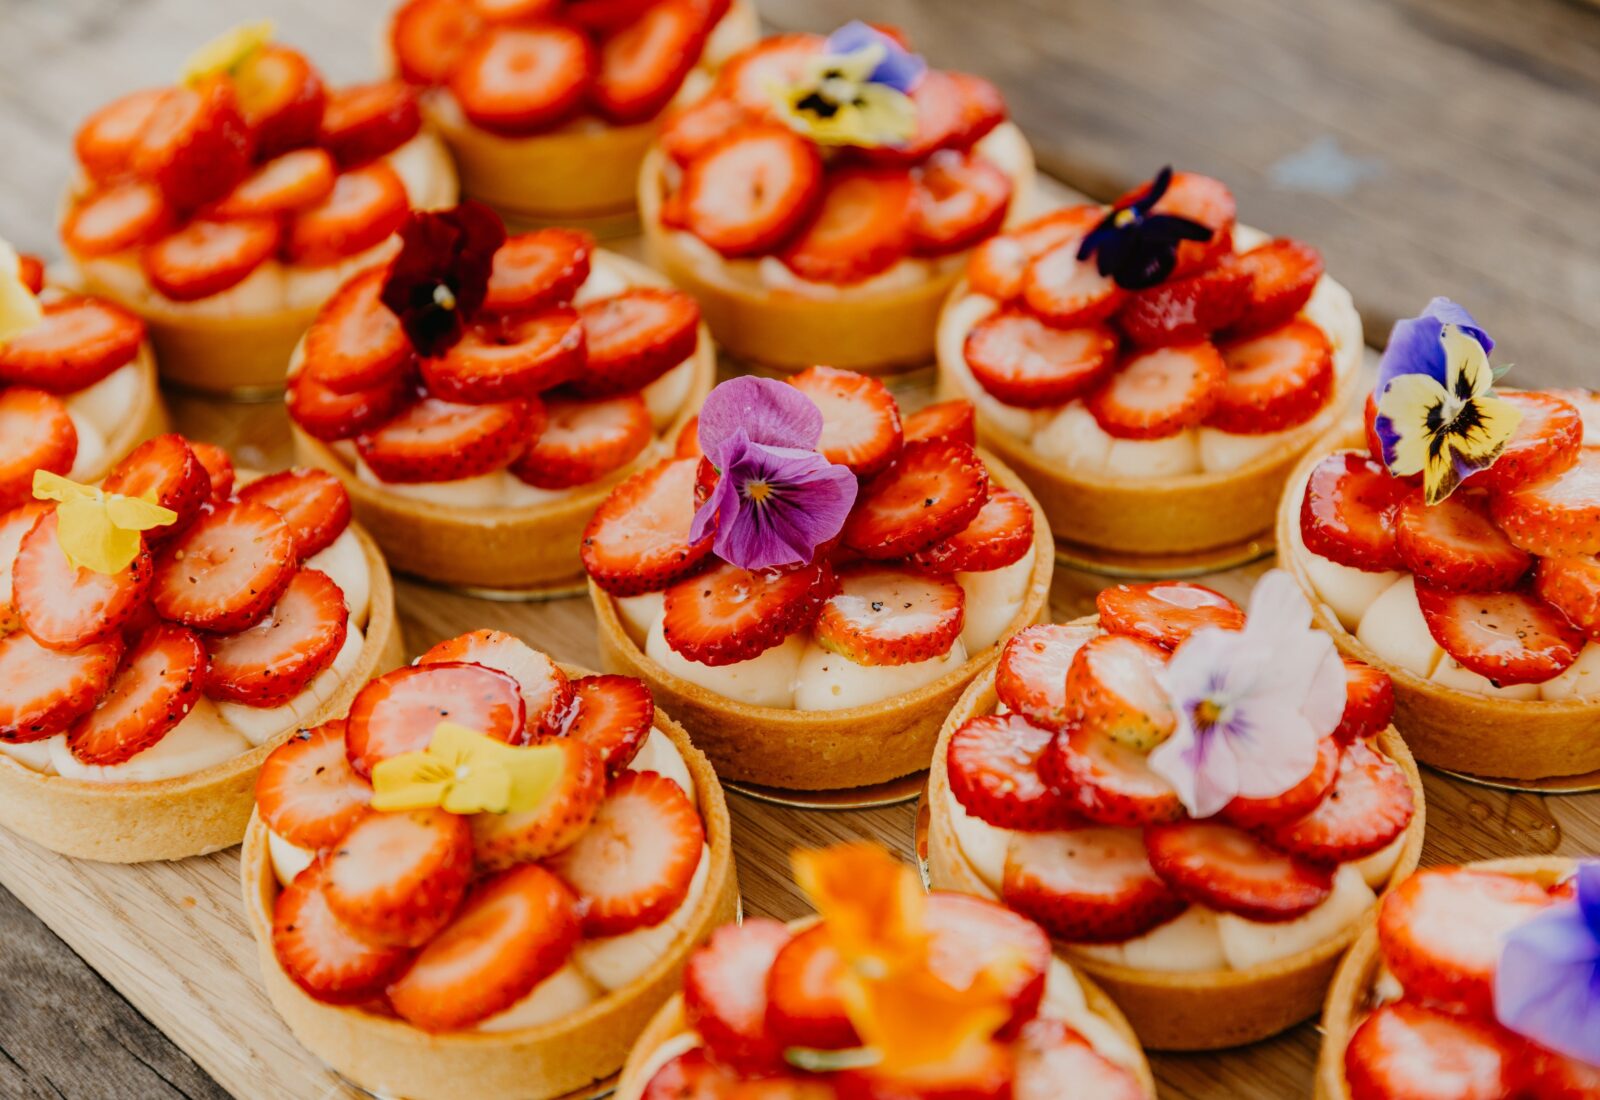 Cubby's iconic strawberry tarts